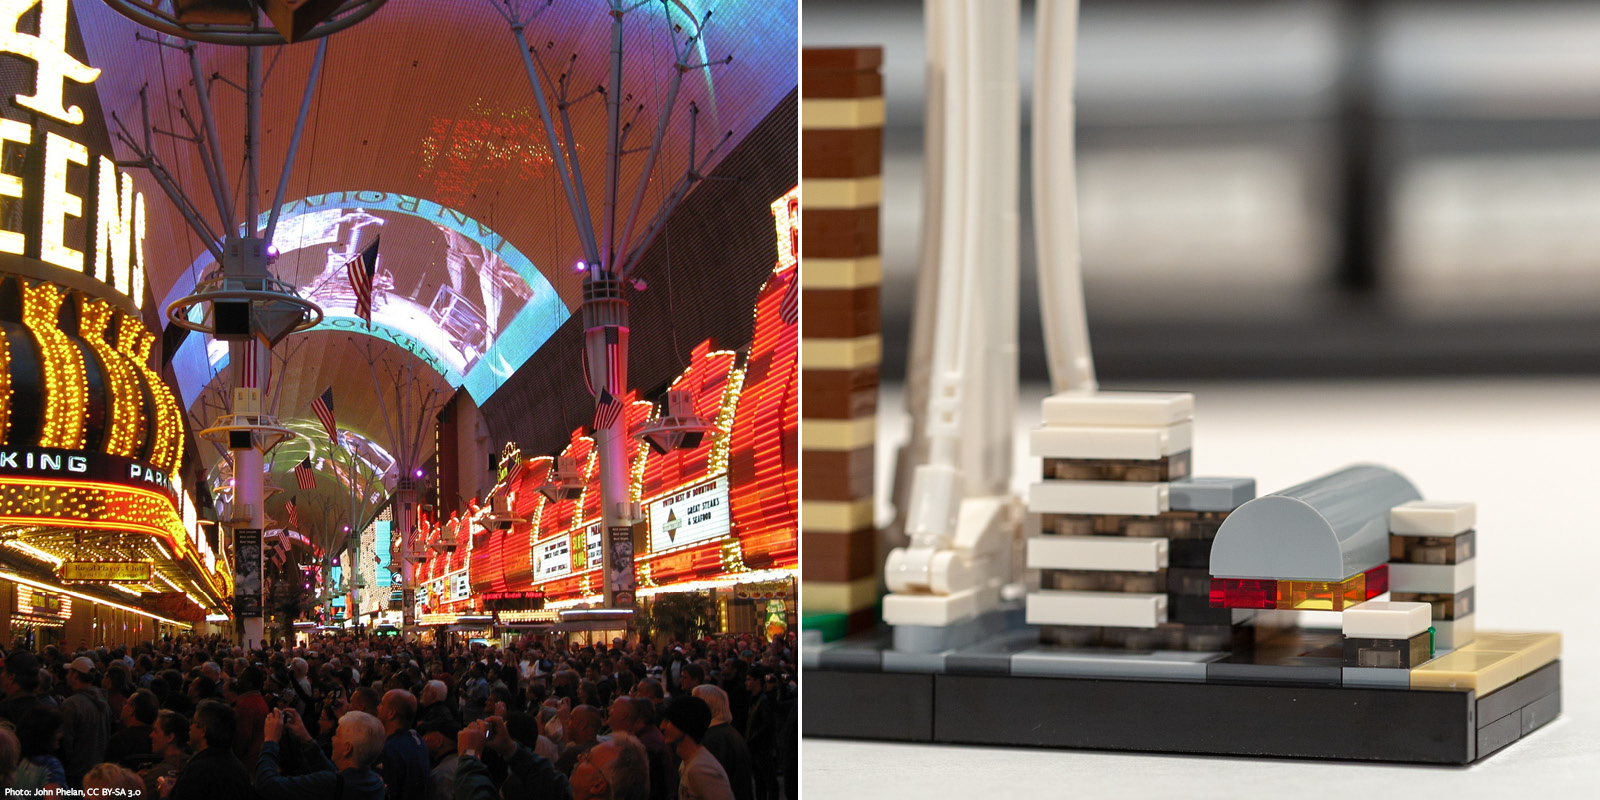 Geographically correct Lego Las Vegas with the High Roller. : r